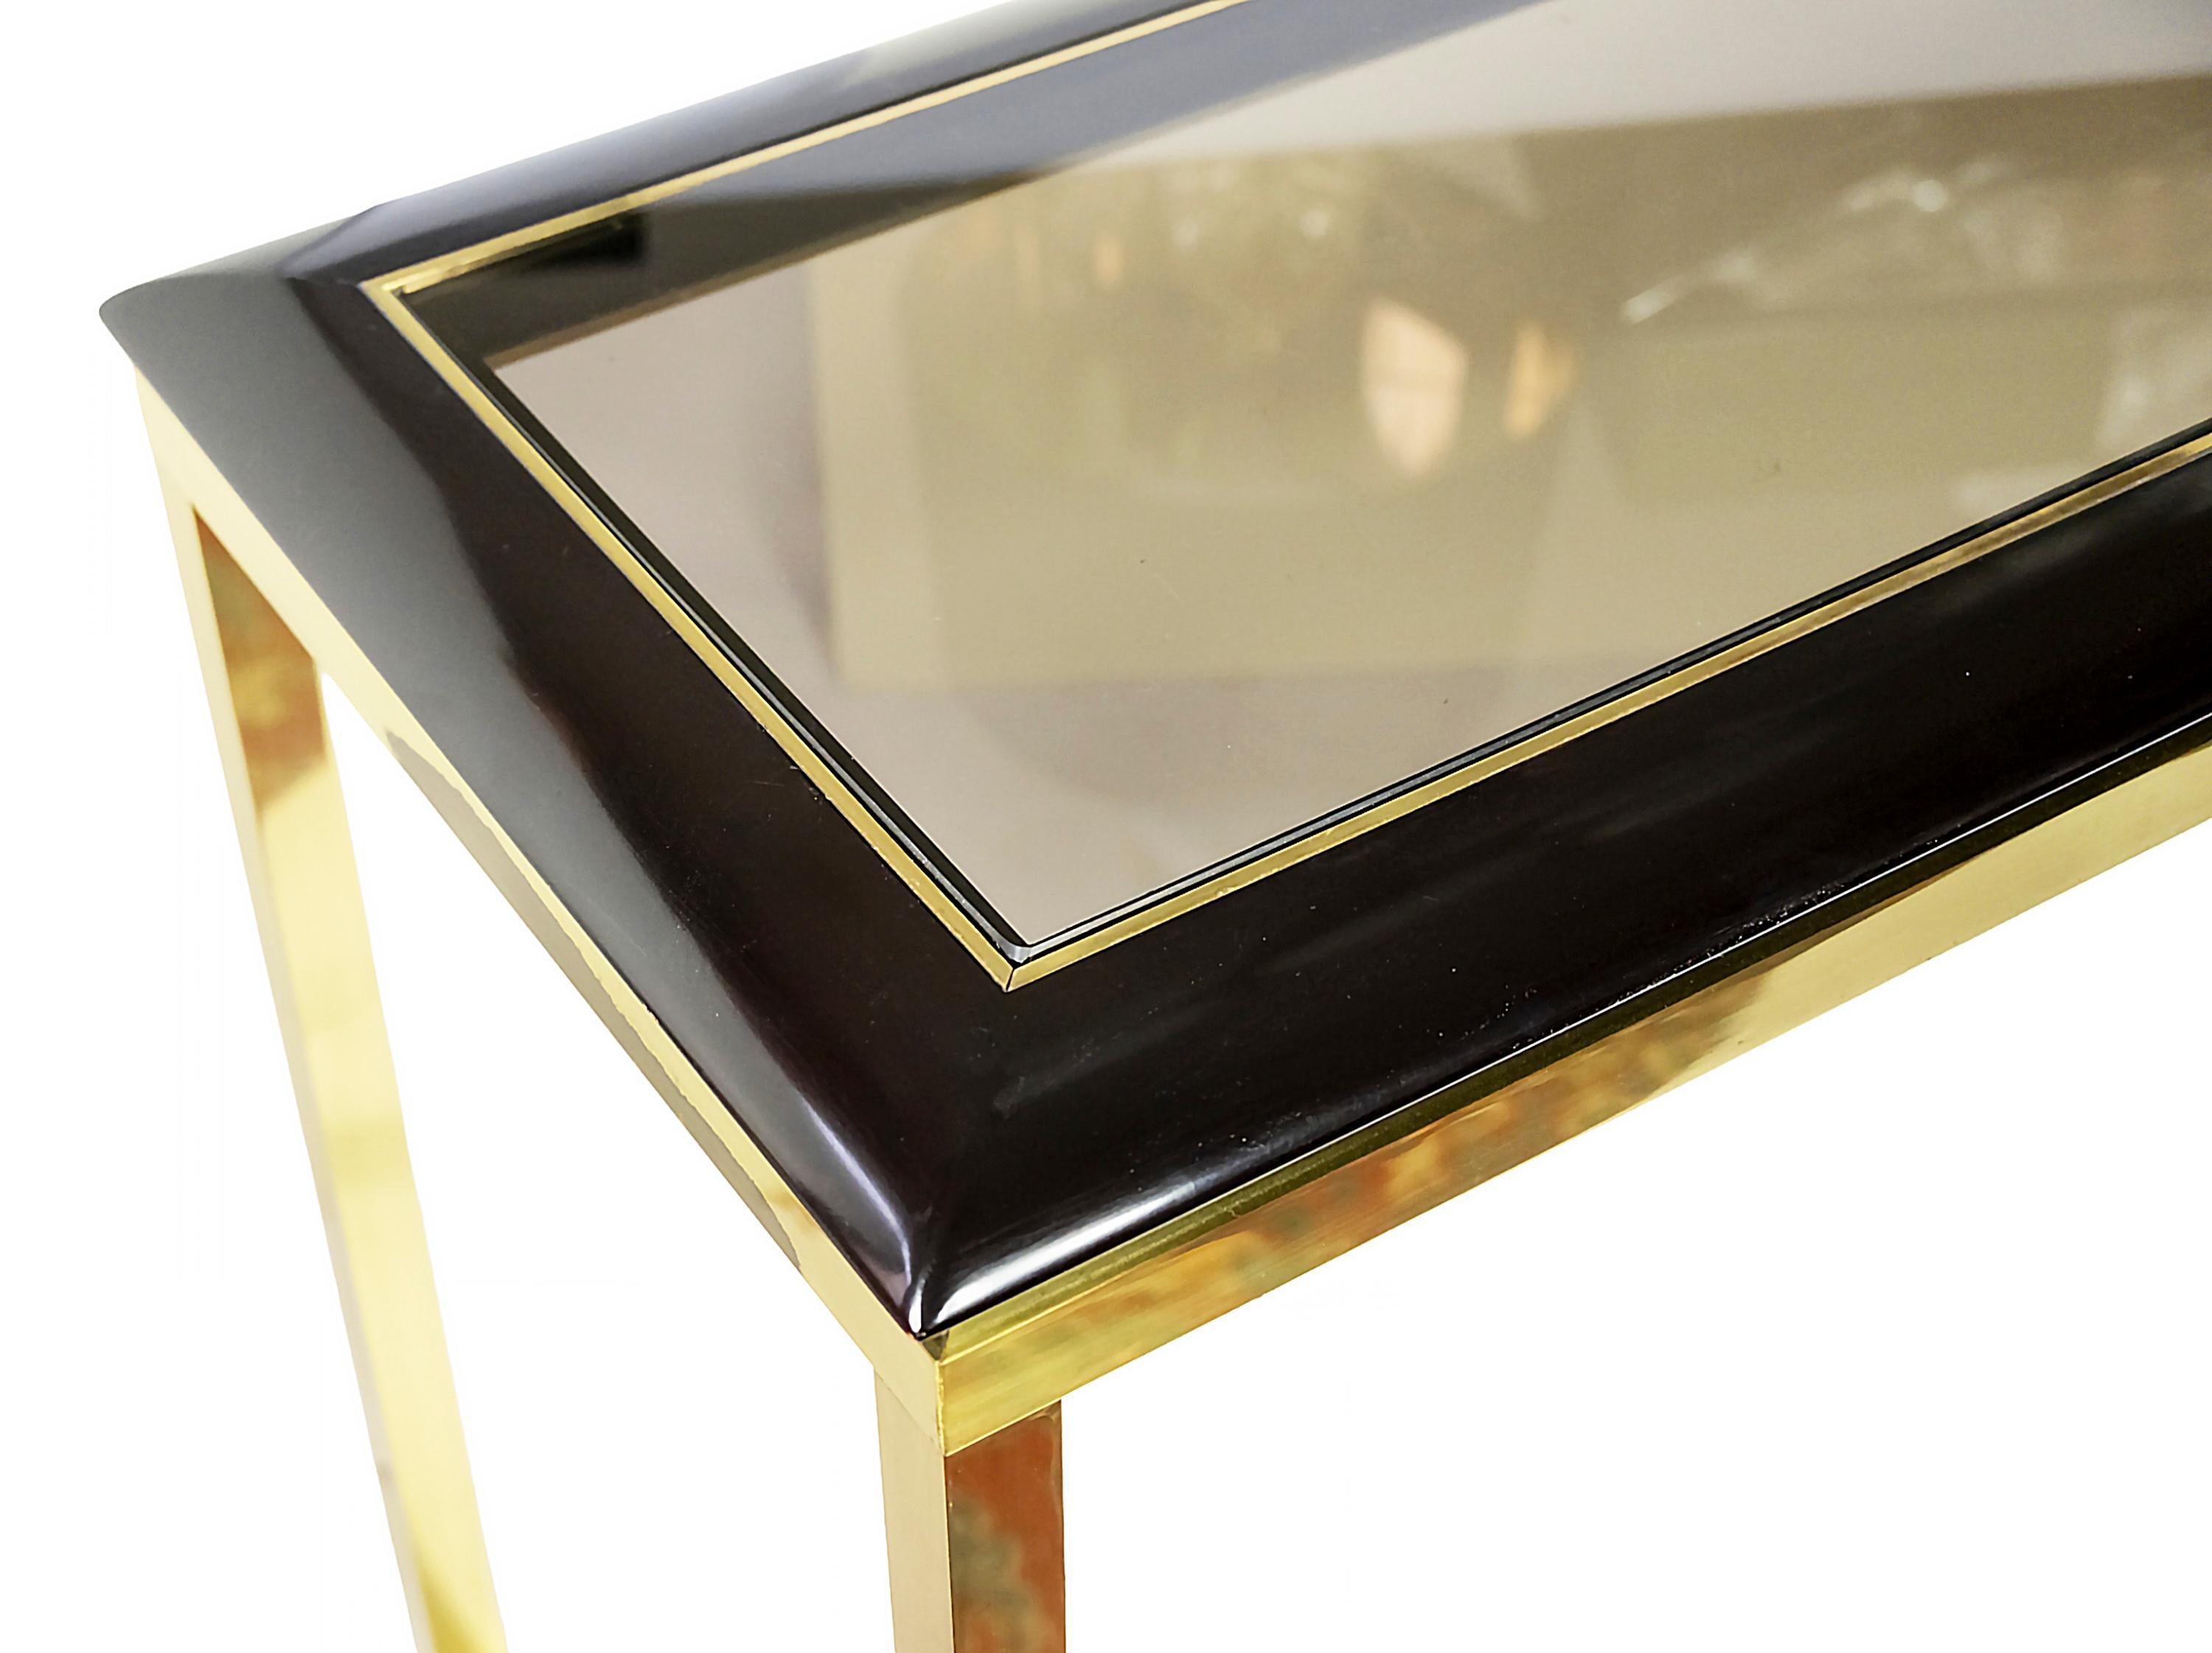 French Mid-Century Brass, Glass, Wood Console Table from 1970's For Sale